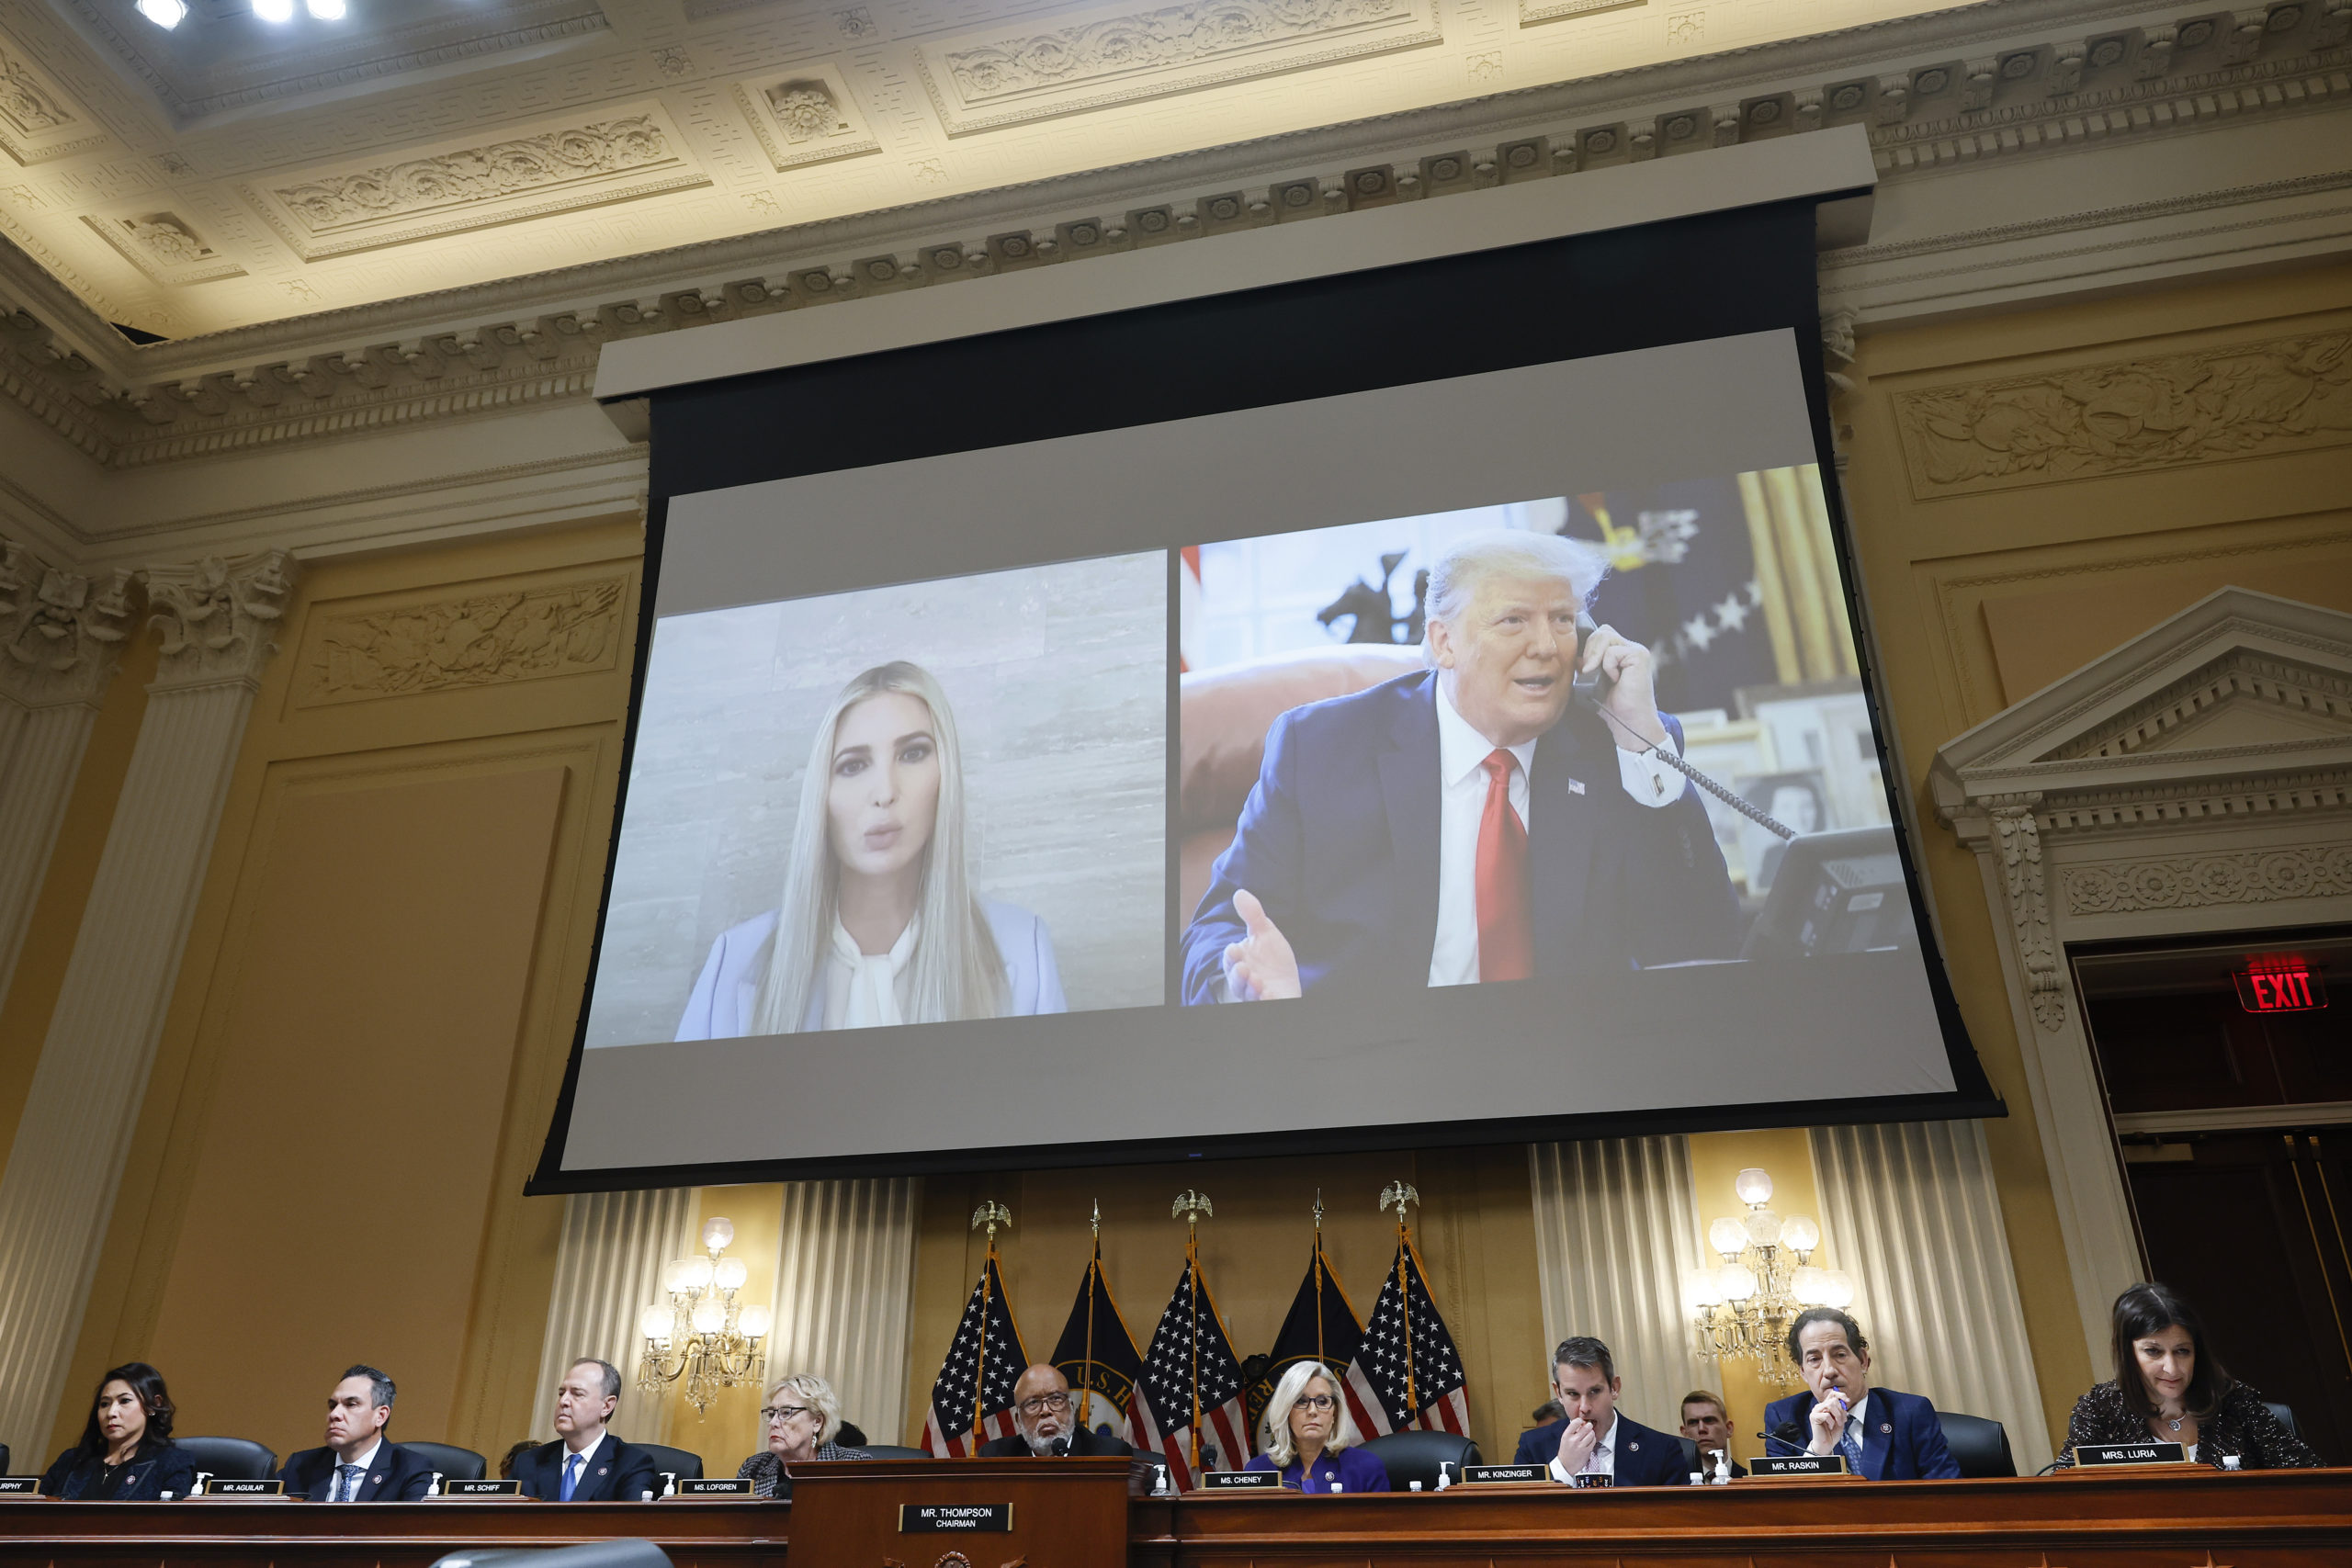 Images of former President Donald Trump and his daughter Ivanka Trump are seen as the House Select Committee to Investigate the January 6 Attack on the U.S. Capitol holds its last public meeting in the Canon House Office Building on Capitol Hill on December 19, 2022 in Washington, DC. The committee is expected to approve its final report and vote on referring charges to the Justice Department. (Photo by Chip Somodevilla/Getty Images)